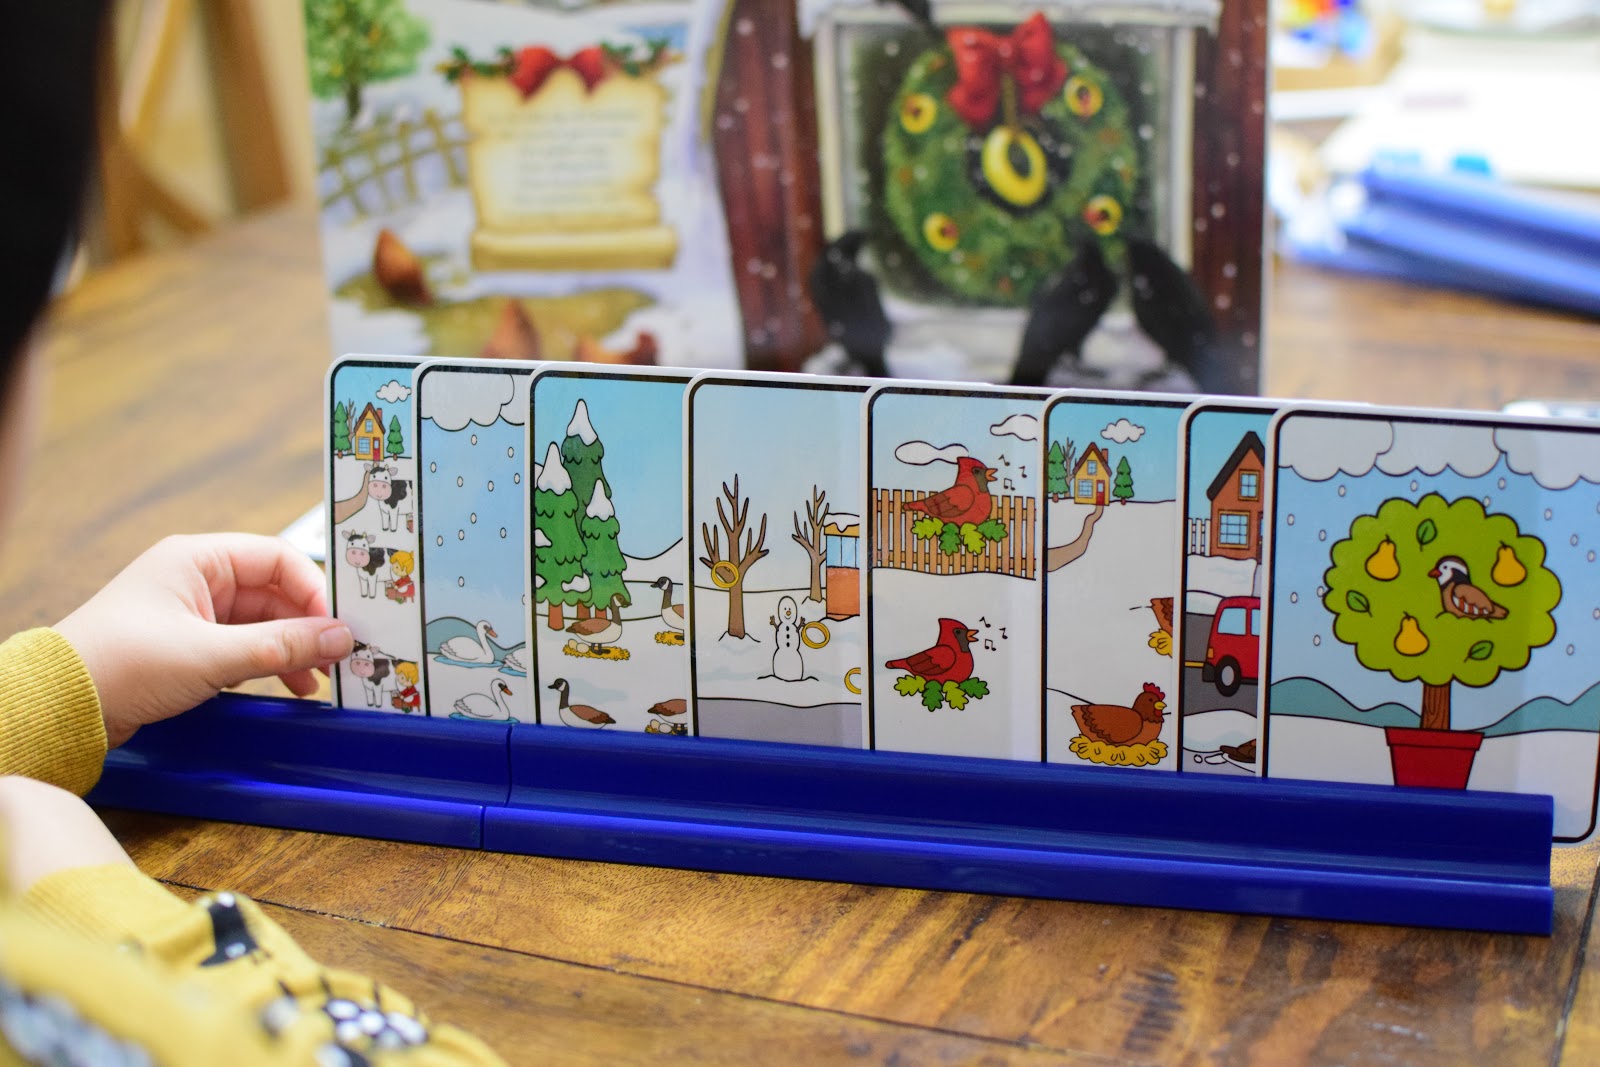 FREE Twelve Days of Christmas Picture Sequencing | The Pinay Homeschooler